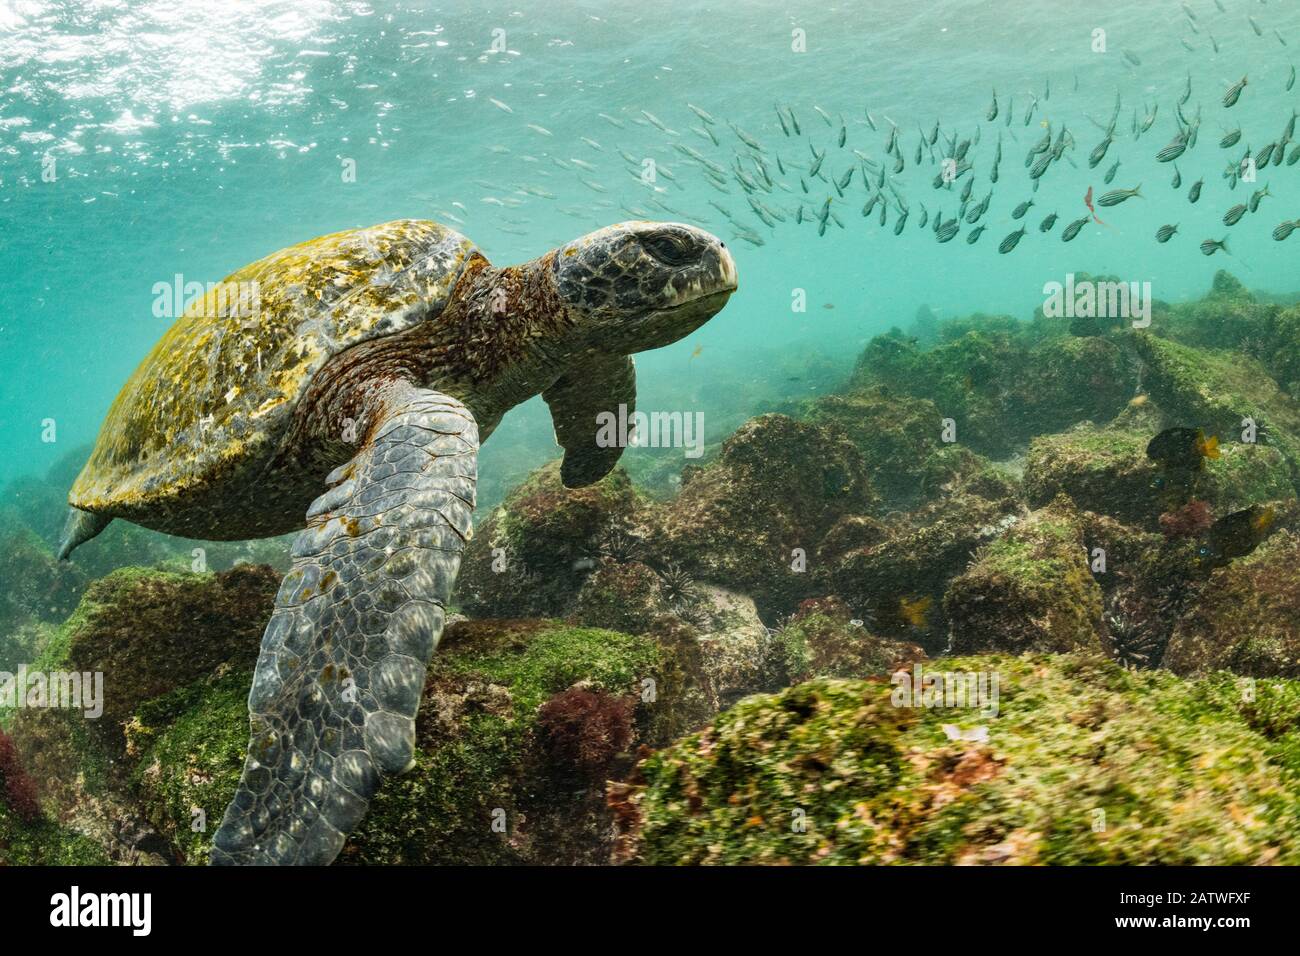 Galapagos green turtle (Chelonia mydas agassizi) swimming above sea floor with shoal of fish in background. Off San Cristobal Island, Galapagos. Stock Photo